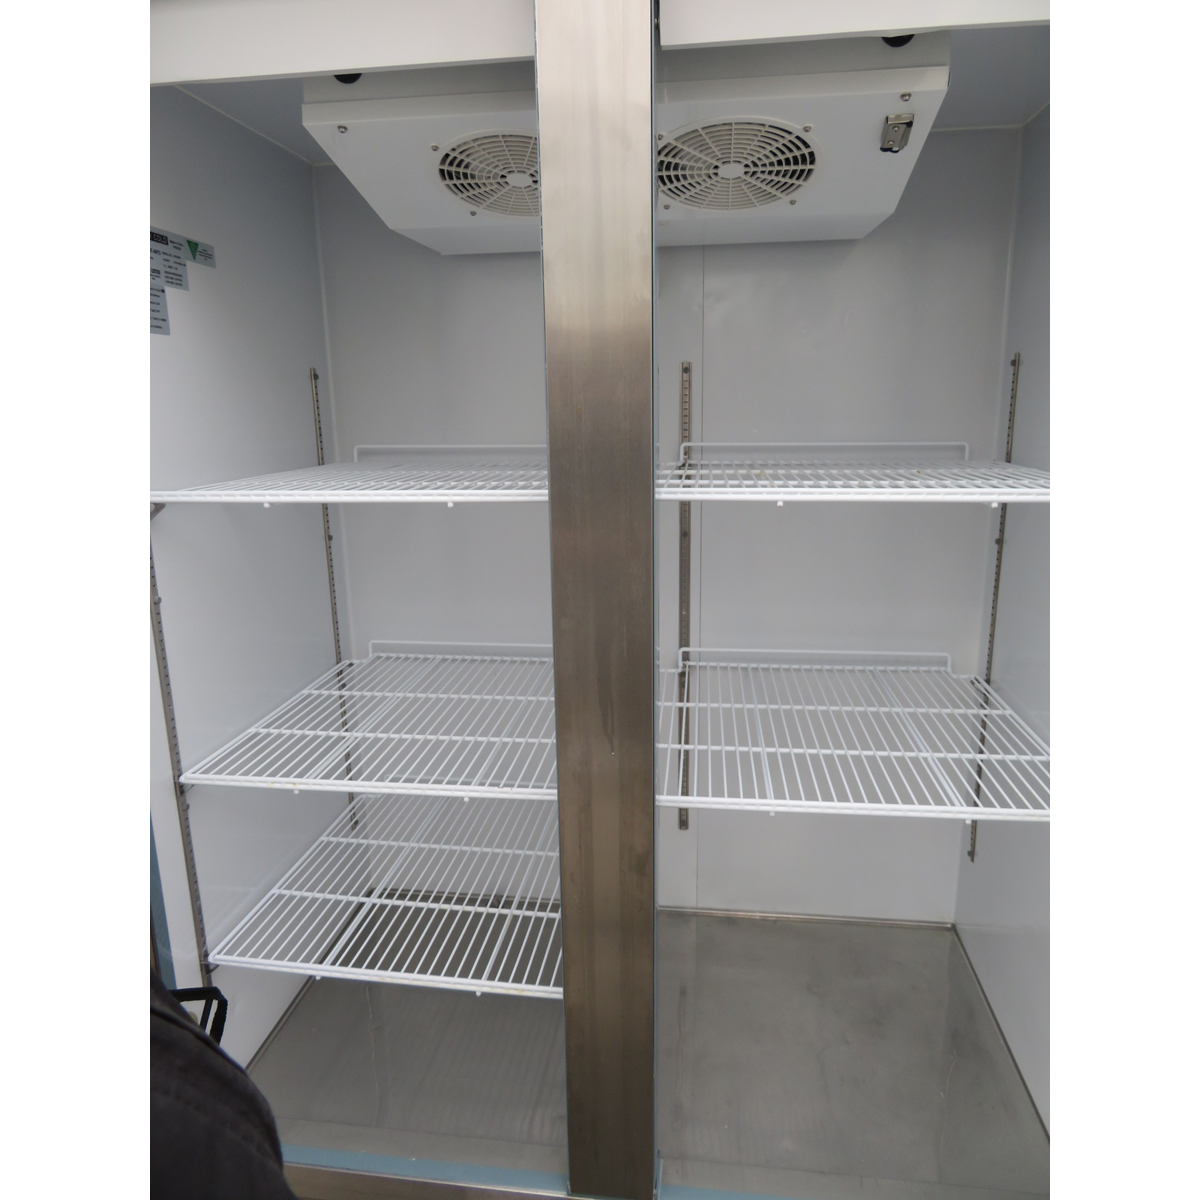 Maxx MXCF-49FD Cold X Reach In Two Door Freezer, Used Excellent Condition image 1